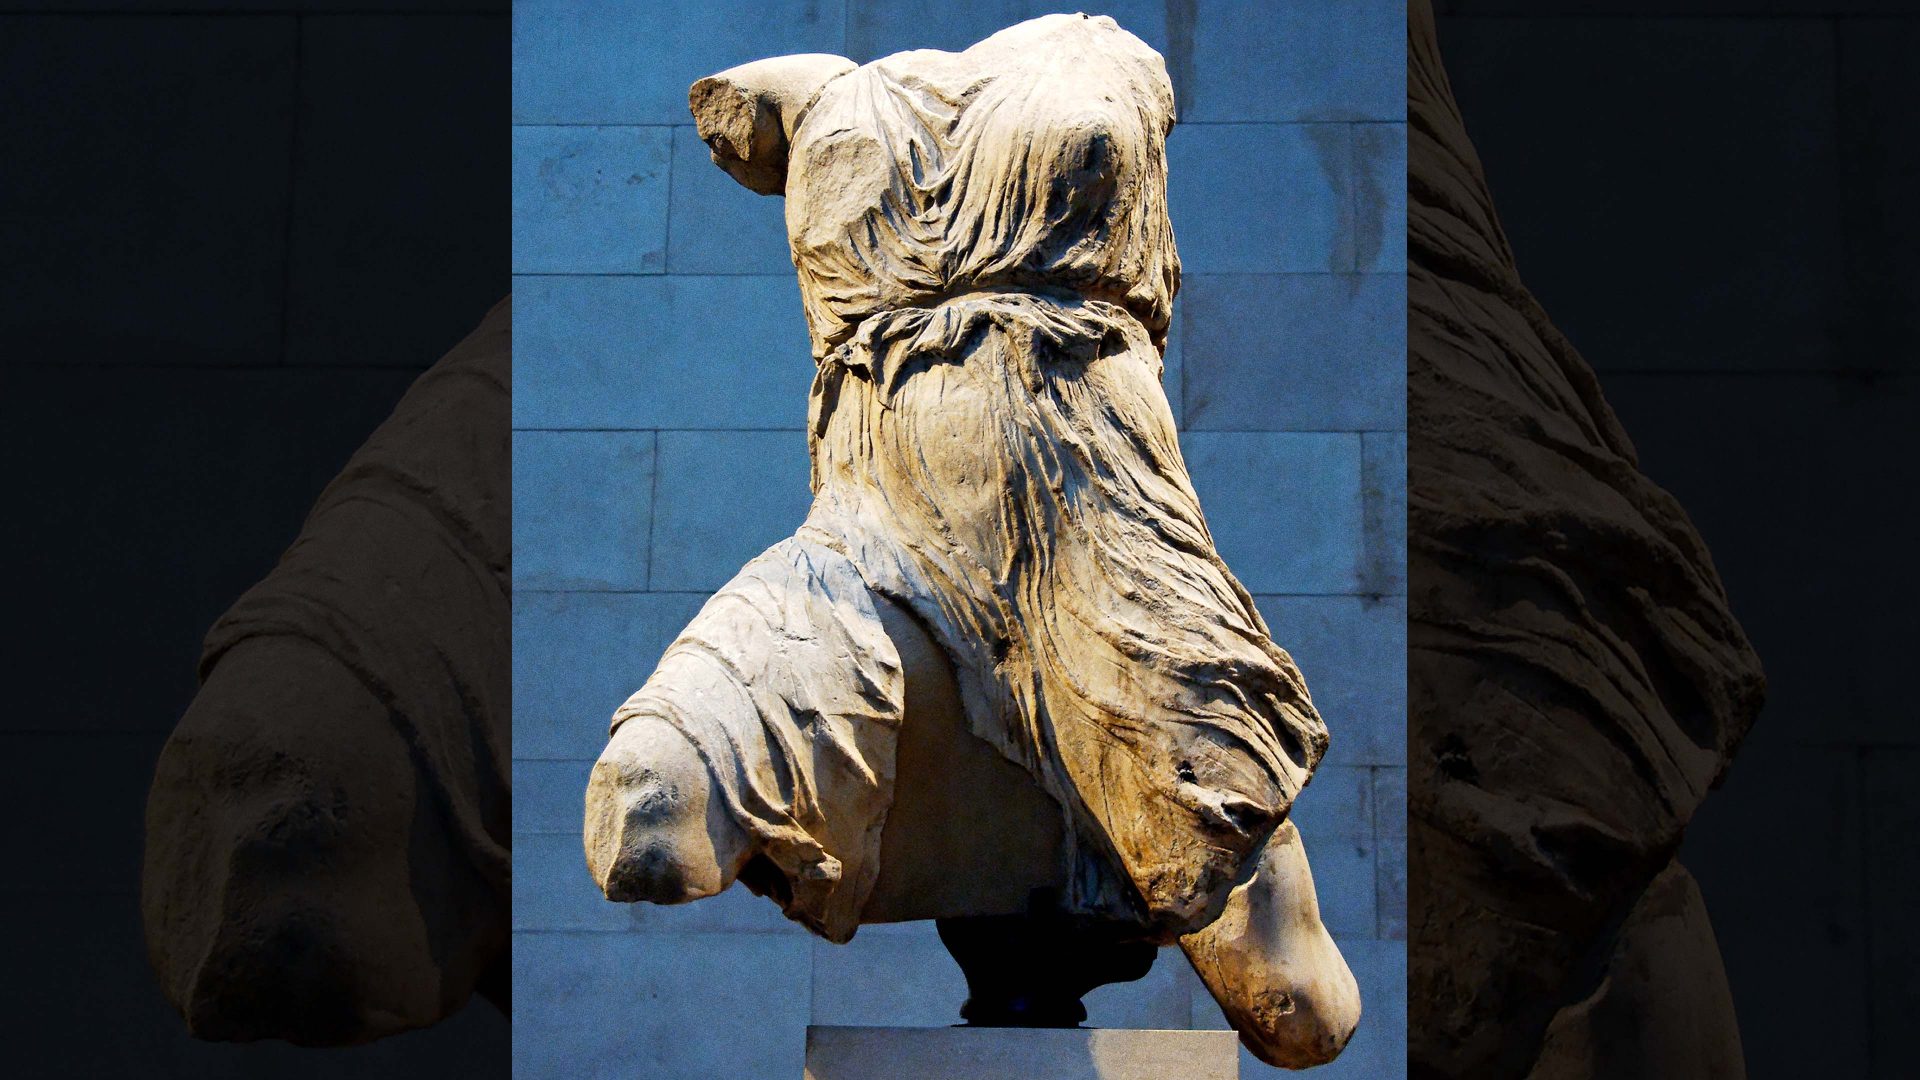 Torso of Iris, winged messenger god, one of the Parthenon sculptures currently in the British Museum. Photos: VCG Wilson/ Corbis/Getty